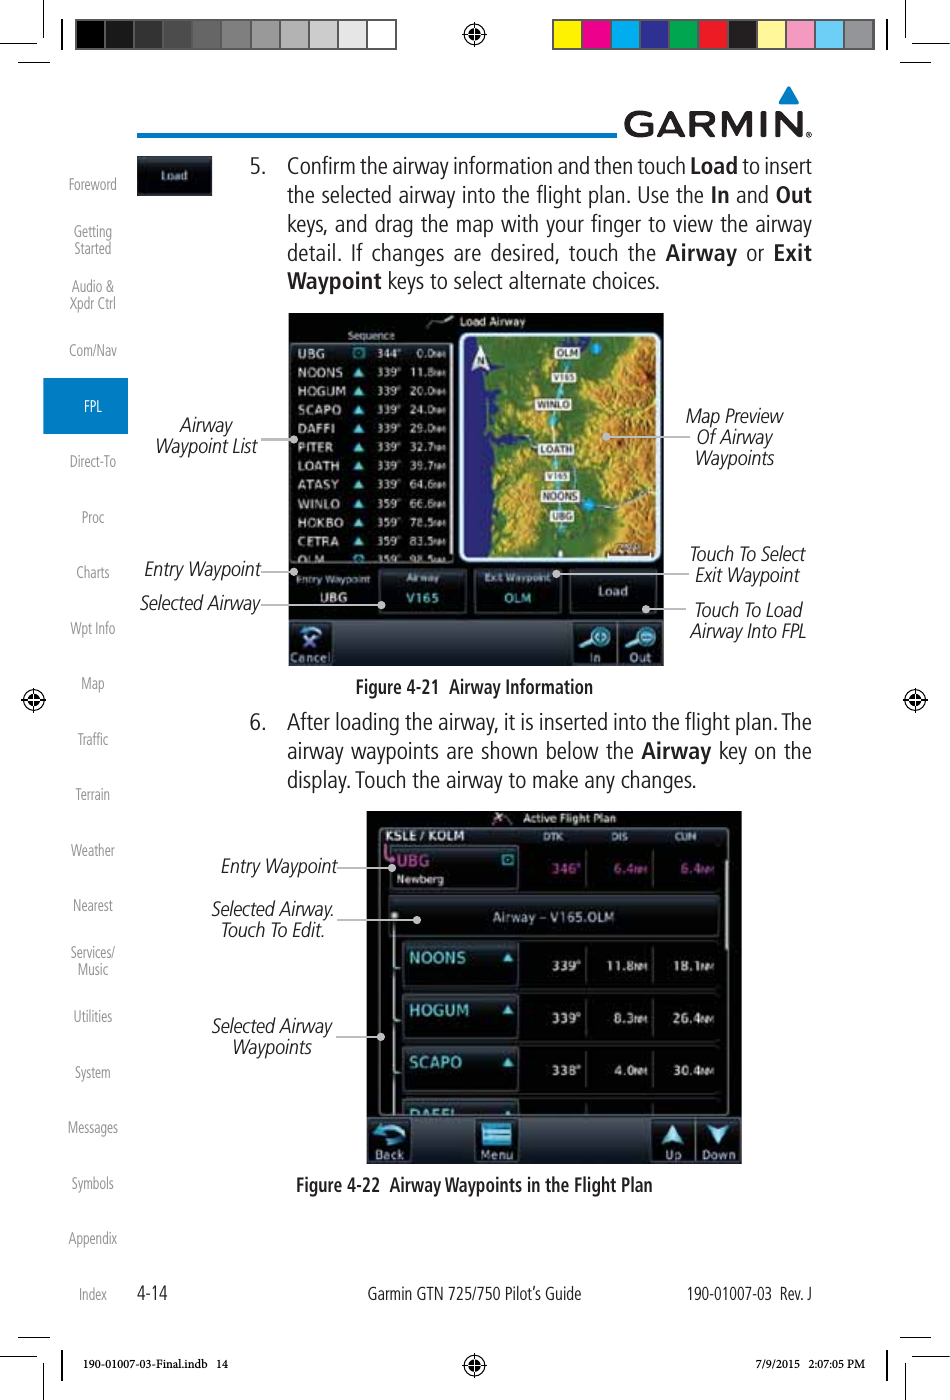 4-14Garmin GTN 725/750 Pilot’s Guide190-01007-03  Rev. JForewordGetting StartedAudio &amp;  Xpdr CtrlCom/NavFPLDirect-ToProcChartsWpt InfoMapTrafﬁcTerrainWeatherNearestServices/ MusicUtilitiesSystemMessagesSymbolsAppendixIndex  5.  Conﬁrm the airway information and then touch Load to insert the selected airway into the ﬂight plan. Use the In and Out keys, and drag the map with your ﬁnger to view the airway detail. If changes are desired, touch the Airway or Exit Waypoint keys to select alternate choices. Touch To Select Exit WaypointTouch To Load Airway Into FPLAirway Waypoint ListEntry WaypointSelected AirwayMap Preview Of Airway WaypointsFigure 4-21  Airway Information  6.  After loading the airway, it is inserted into the ﬂight plan. The airway waypoints are shown below the Airway key on the display. Touch the airway to make any changes. Entry WaypointSelected Airway. Touch To Edit. Selected Airway WaypointsFigure 4-22  Airway Waypoints in the Flight Plan190-01007-03-Final.indb   14 7/9/2015   2:07:05 PM